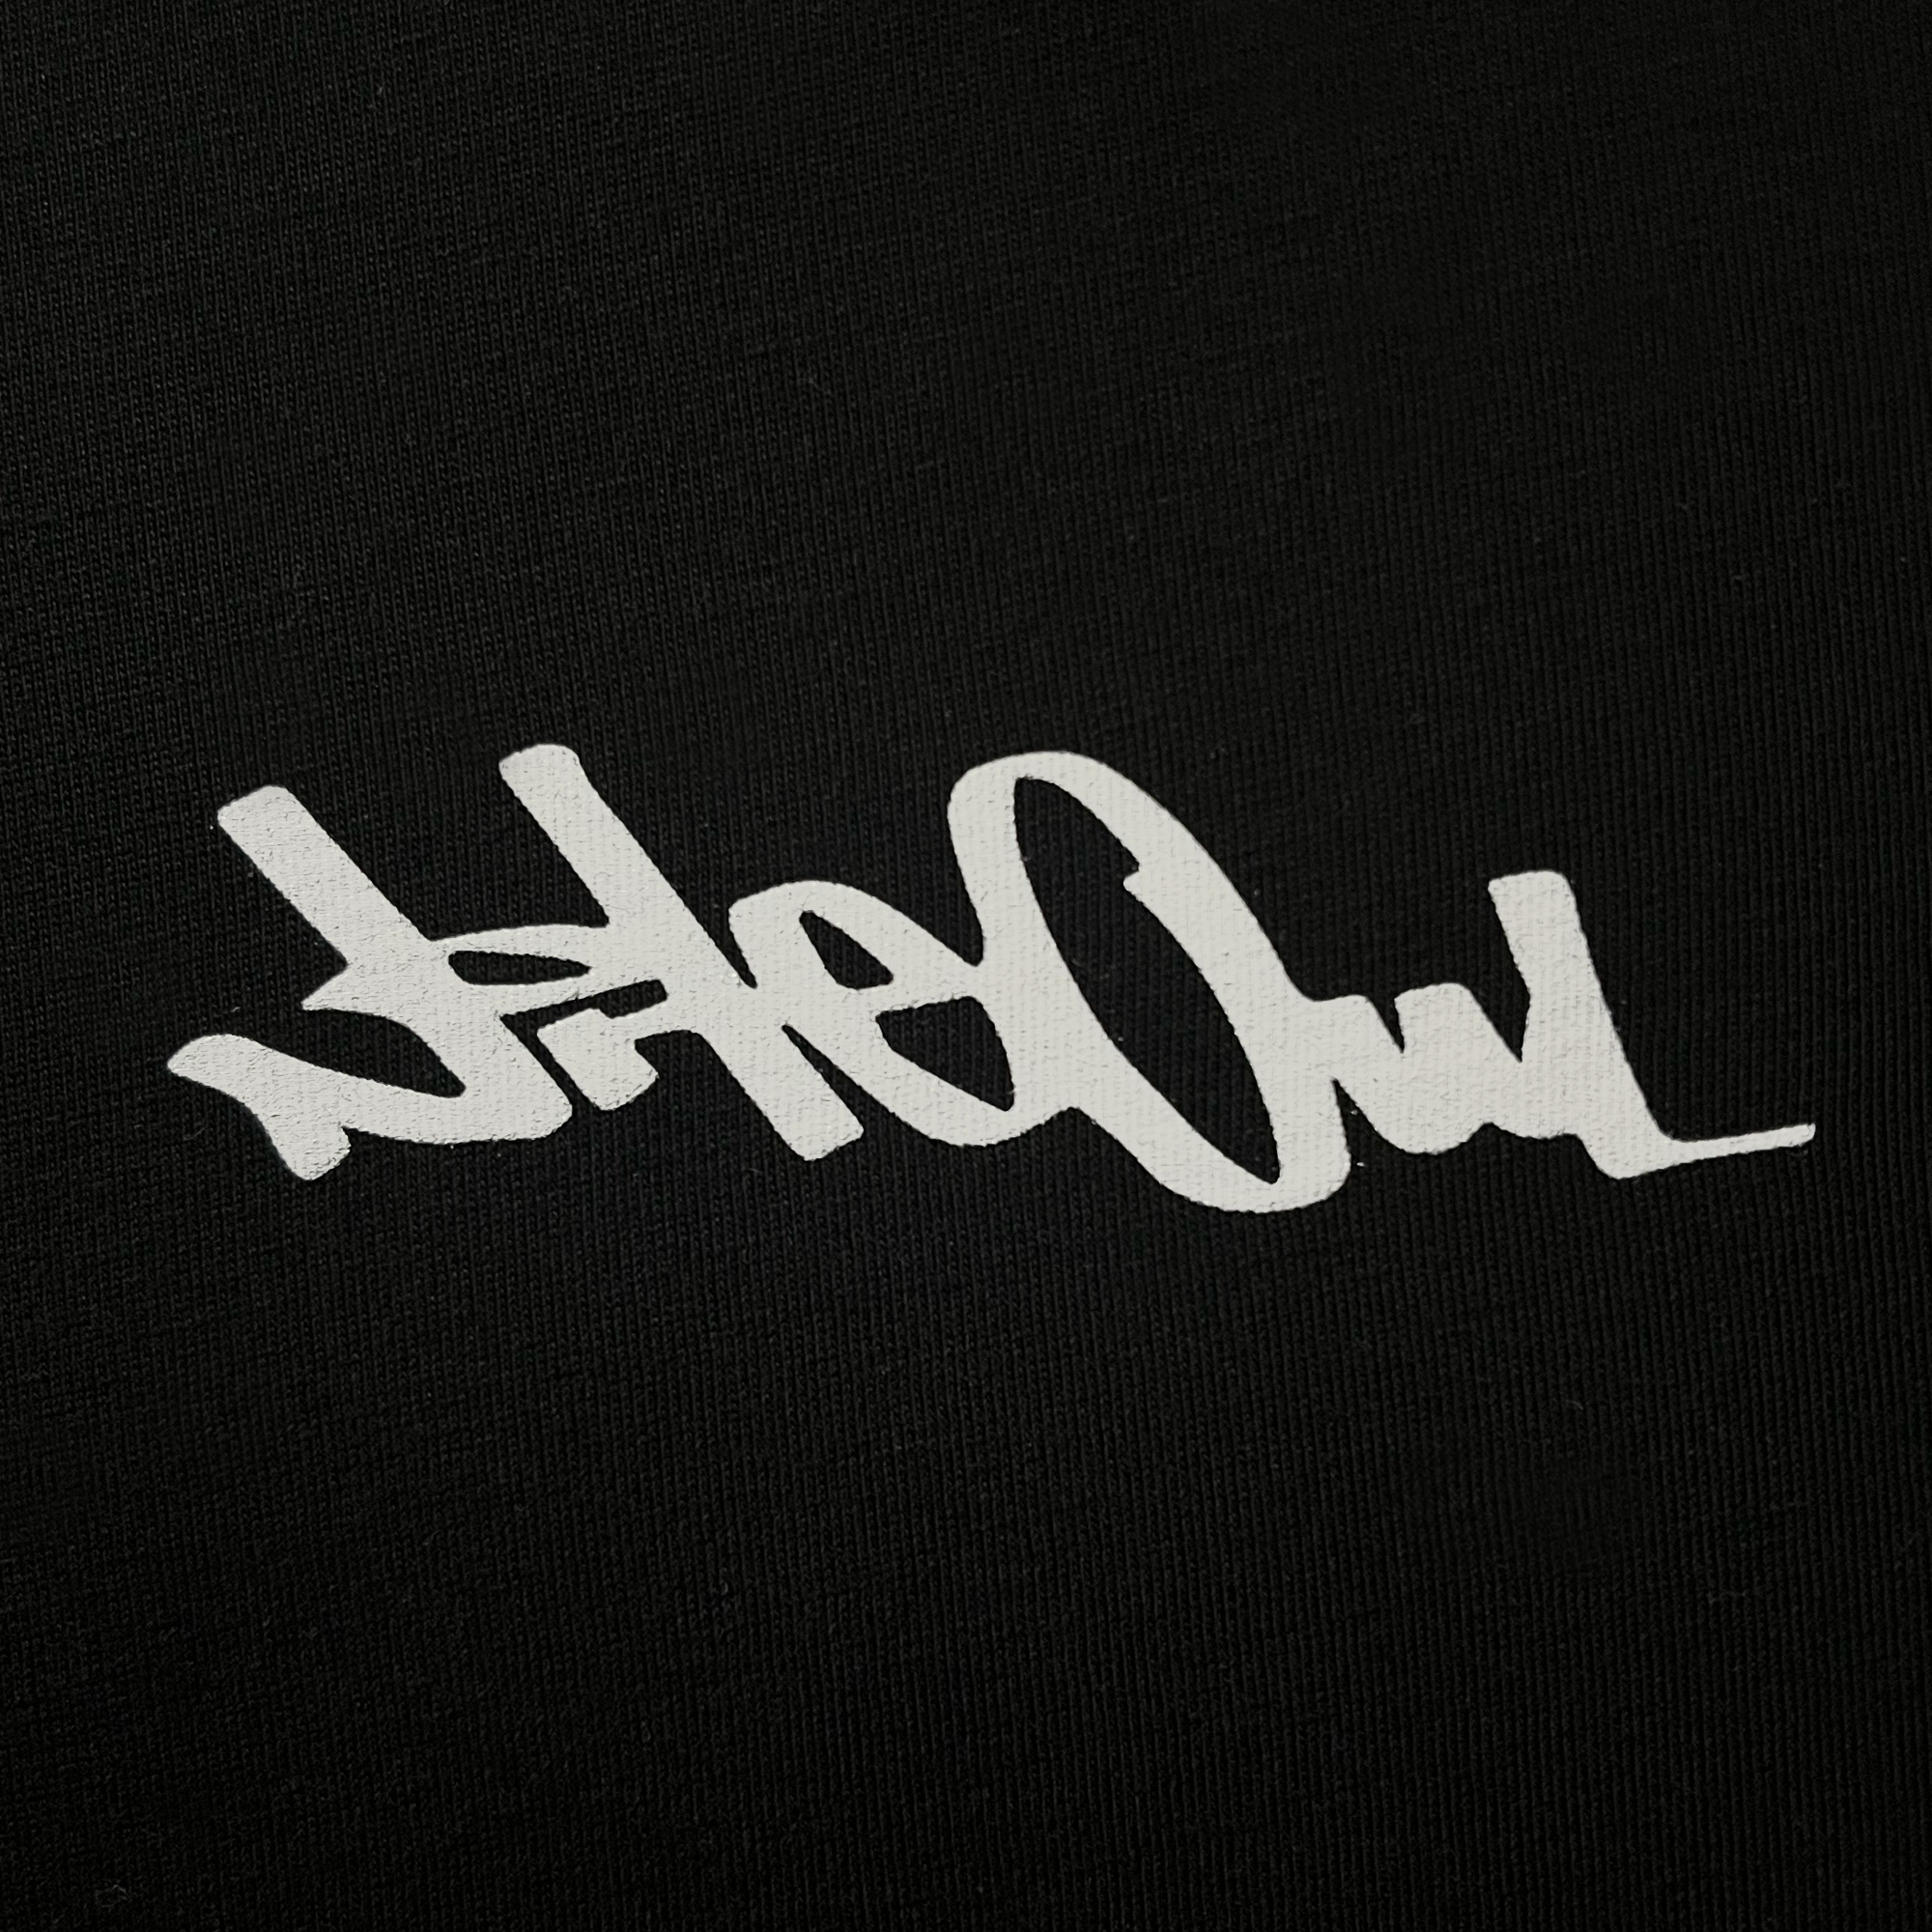 Front close-up of Oakland artist Nite Owl logo/signature in white ink on the chest of a black t-shirt.